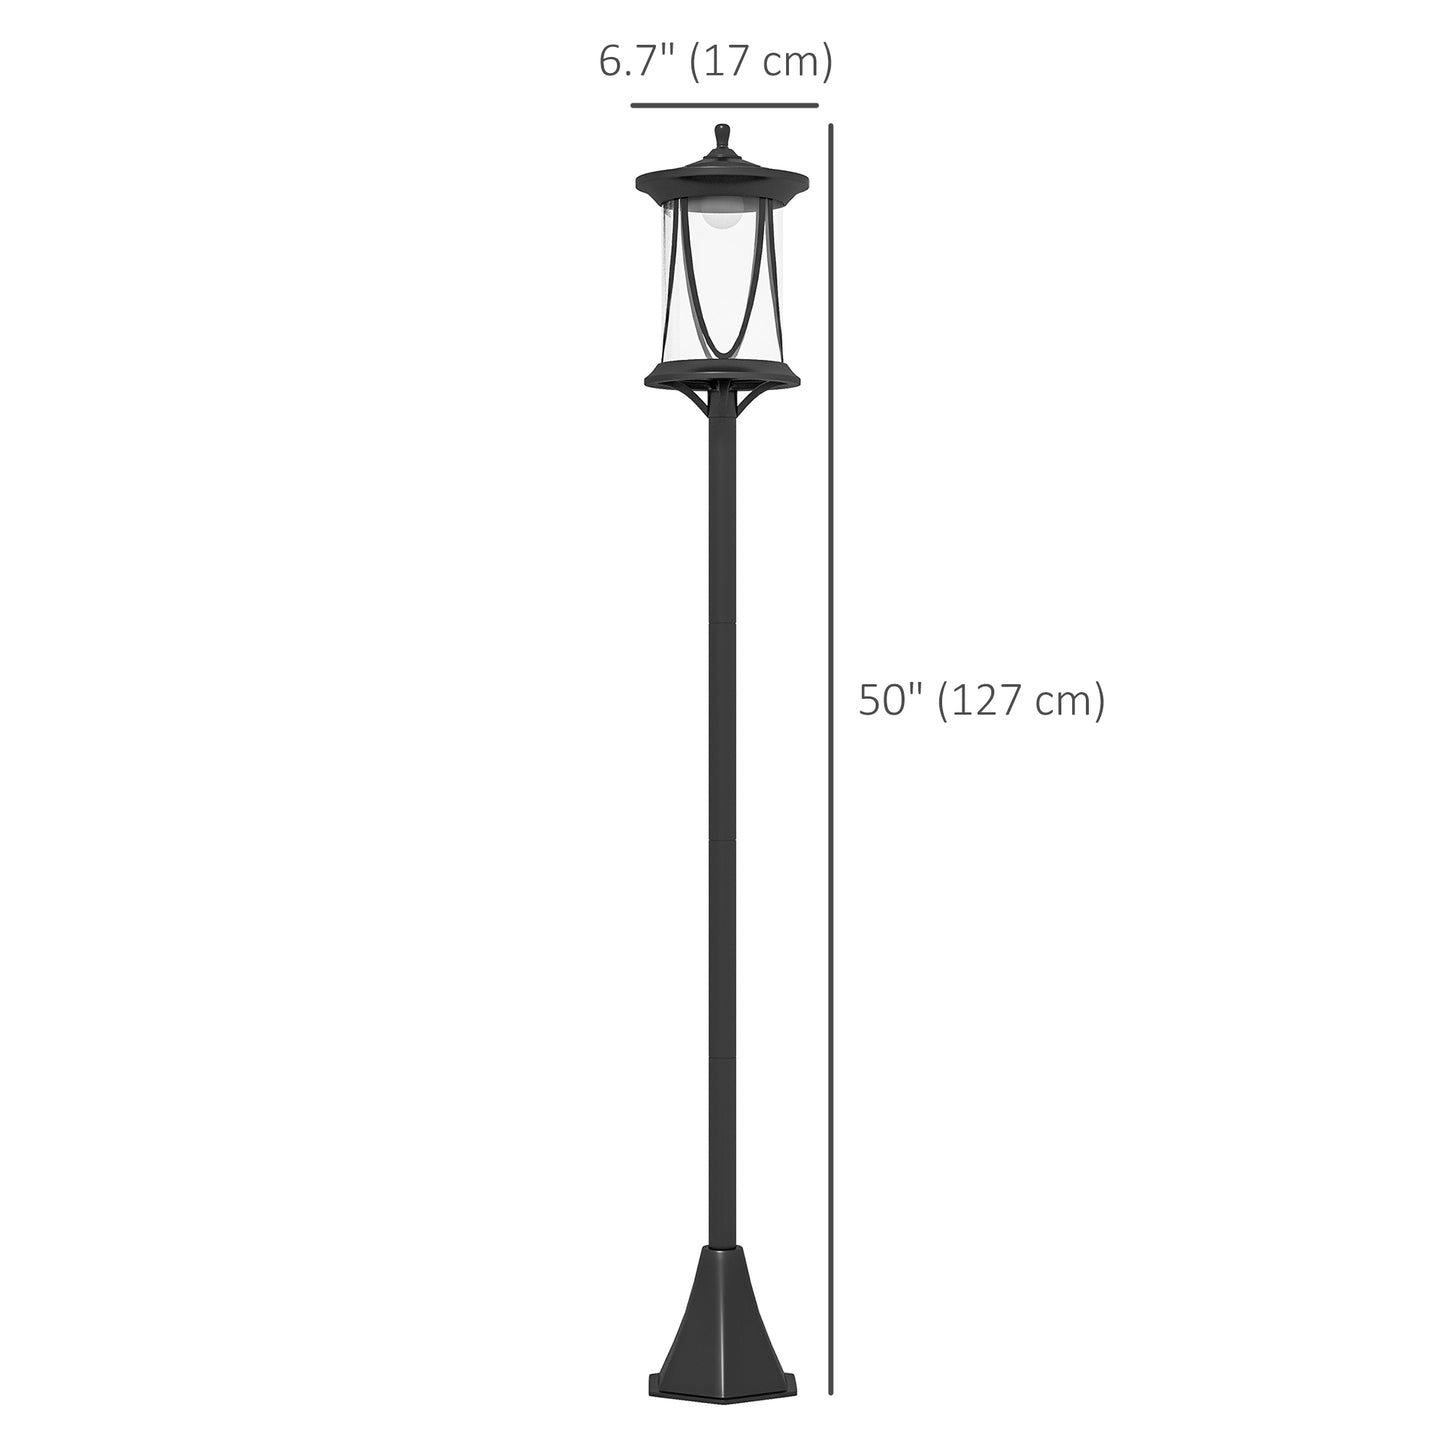 50" Solar Post Light, Cool White LED Outdoor Lamp, Waterproof IP44 for Patio, Garden, Backyard, Pathway - Gallery Canada